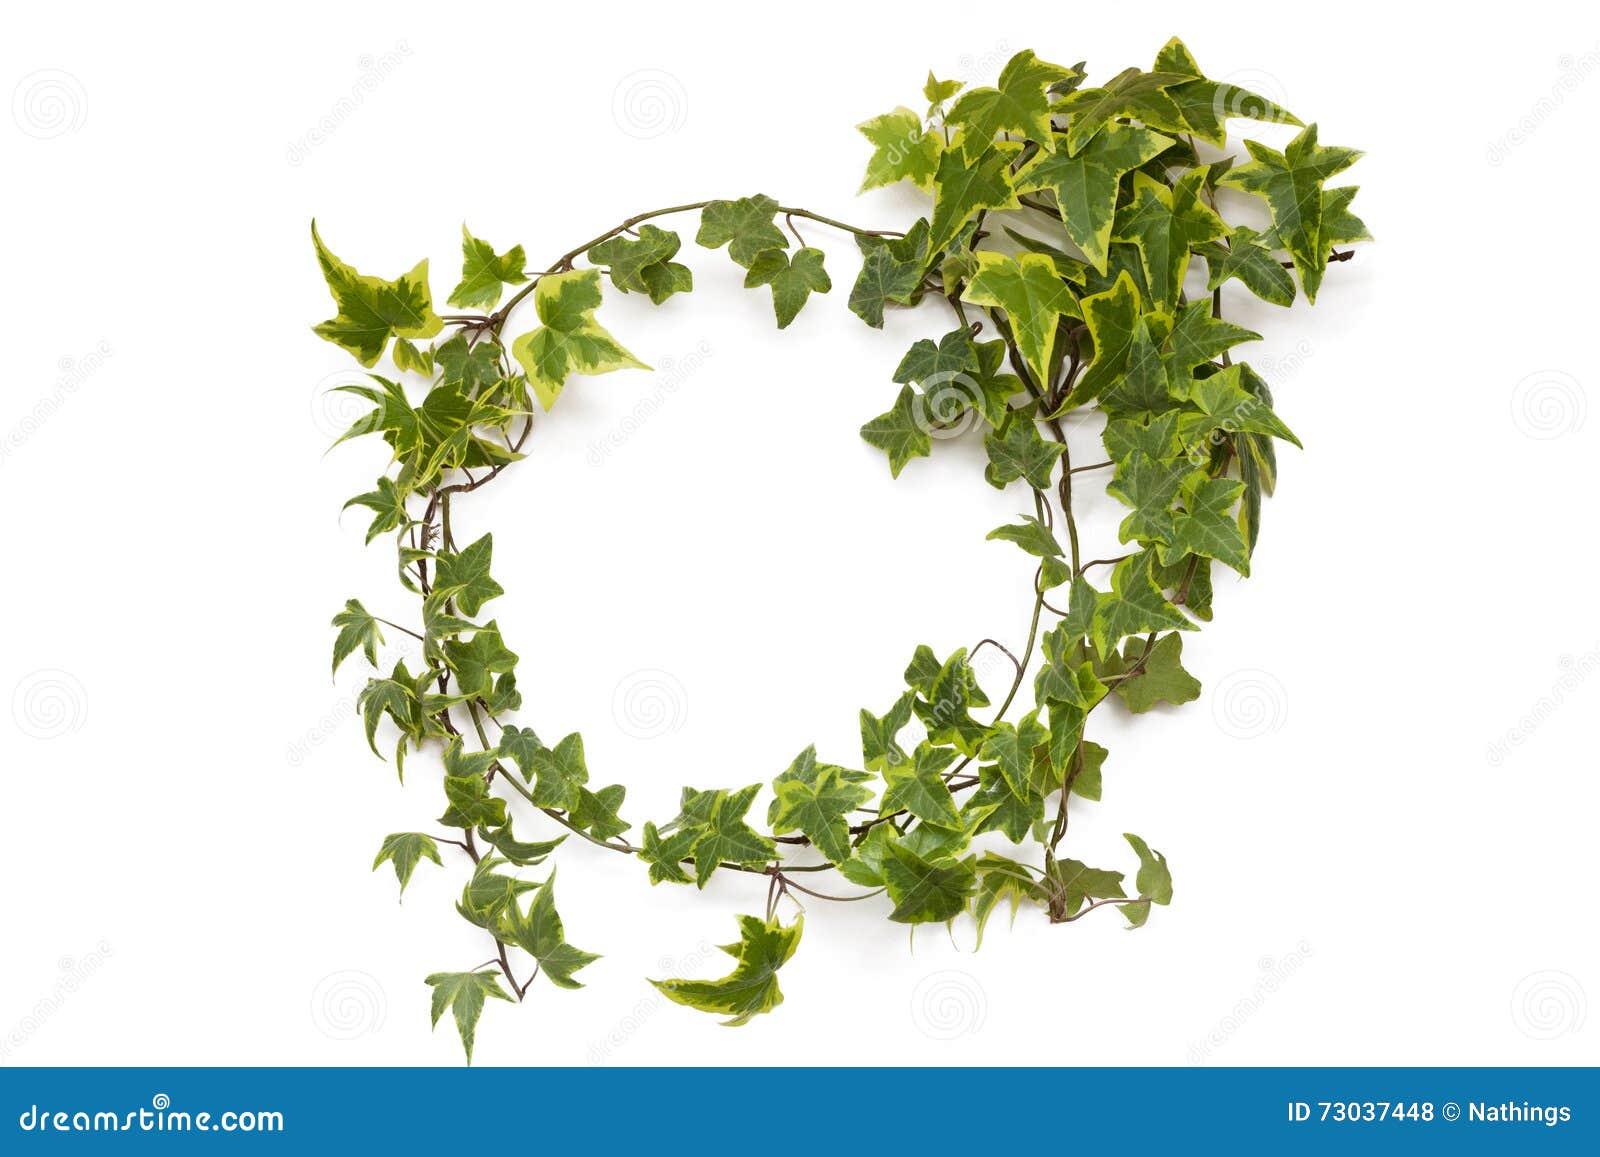 Green Ivy Plant Natural Circle Frame on White Background Stock Photo ...